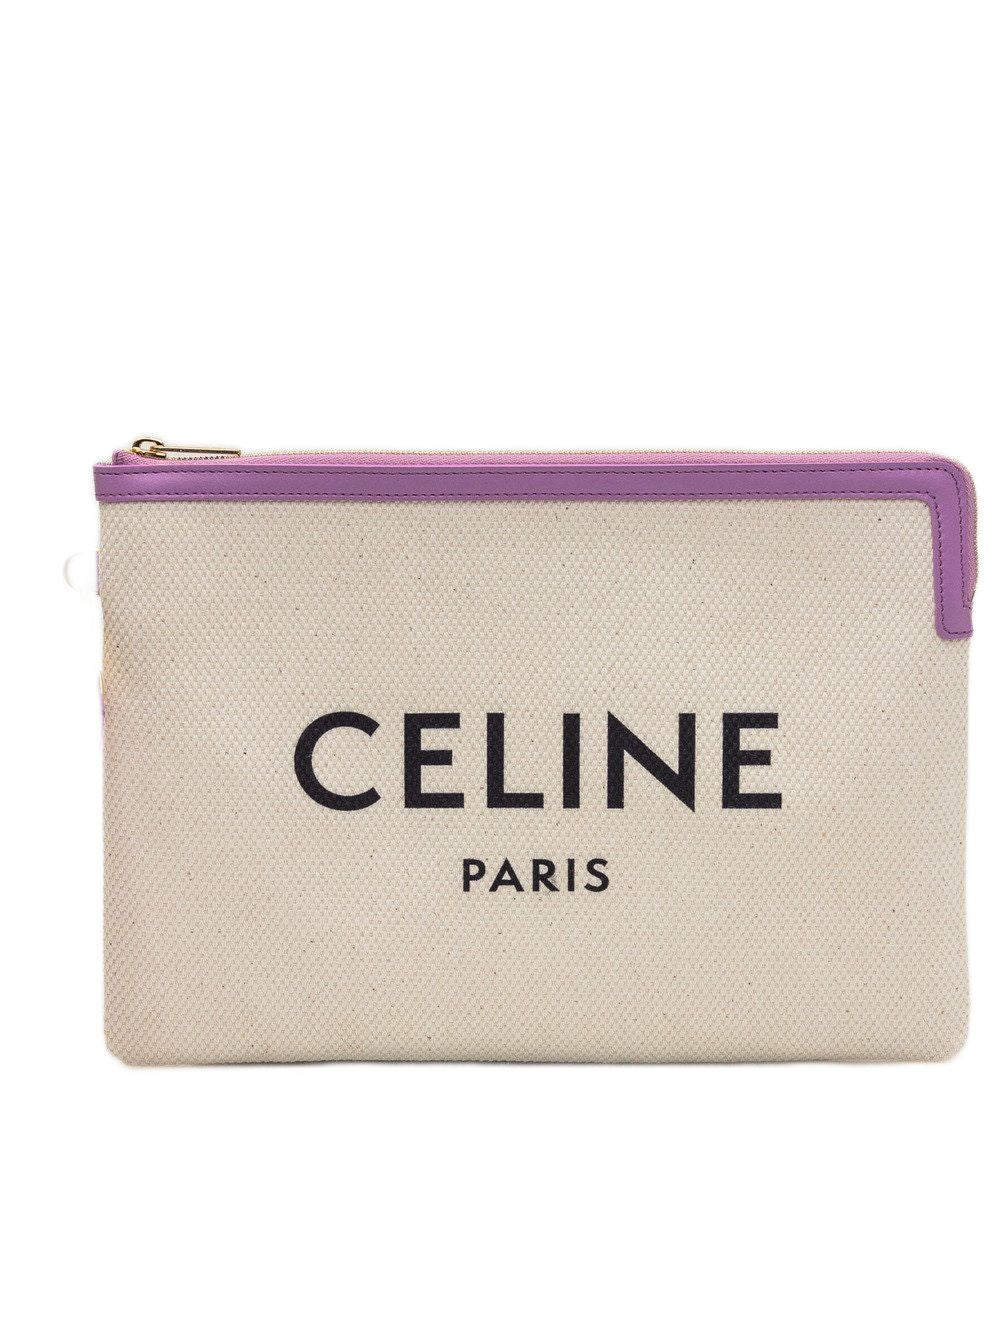 CELINE Women's Pink Leather Mini Pouch Clutch with Strap for Spring/Summer 2027